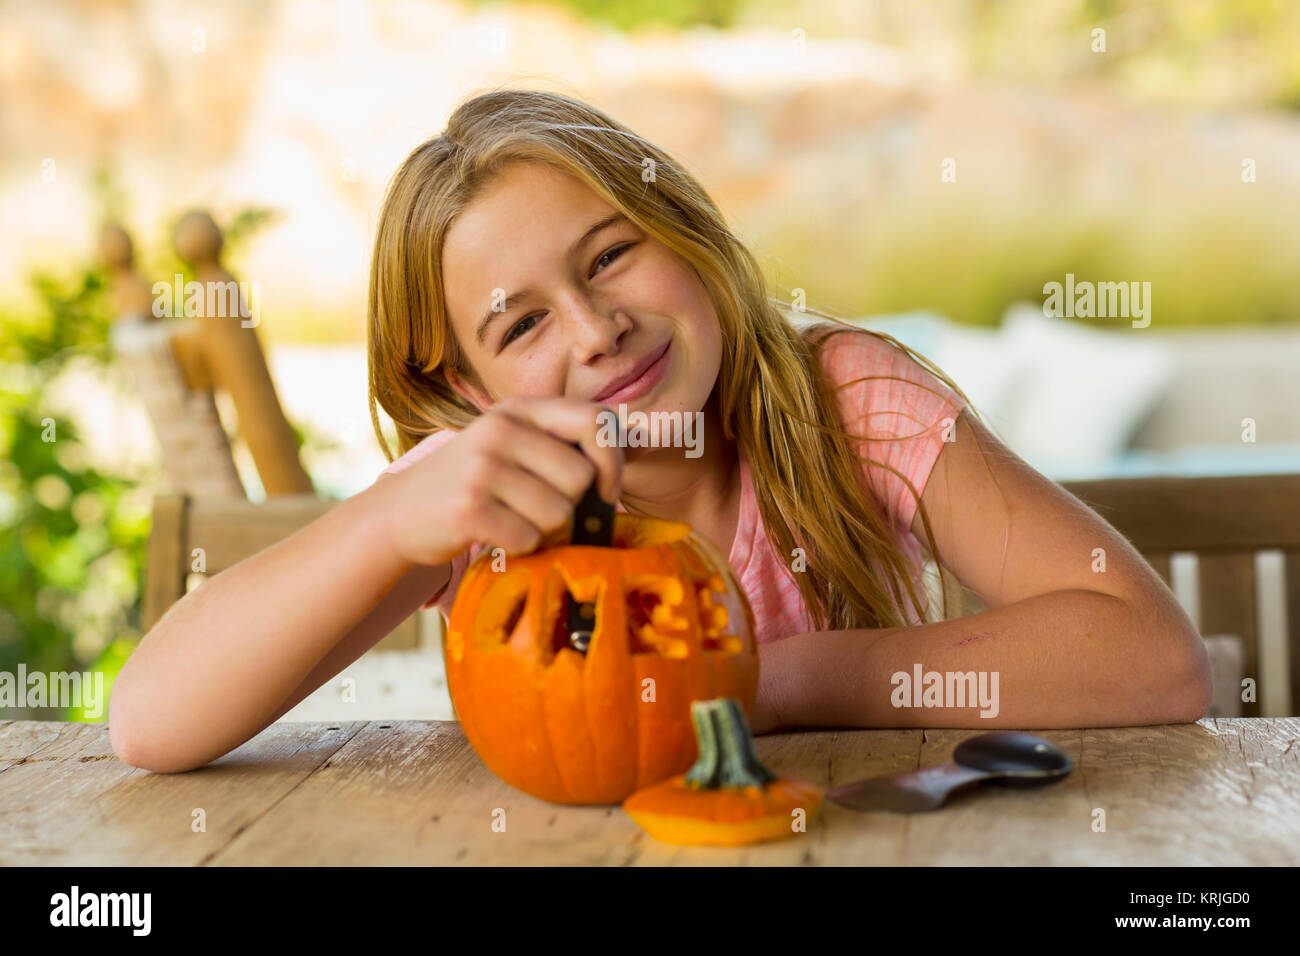 Portrait of smiling Caucasian girl with carved pumpkin Stock Photo